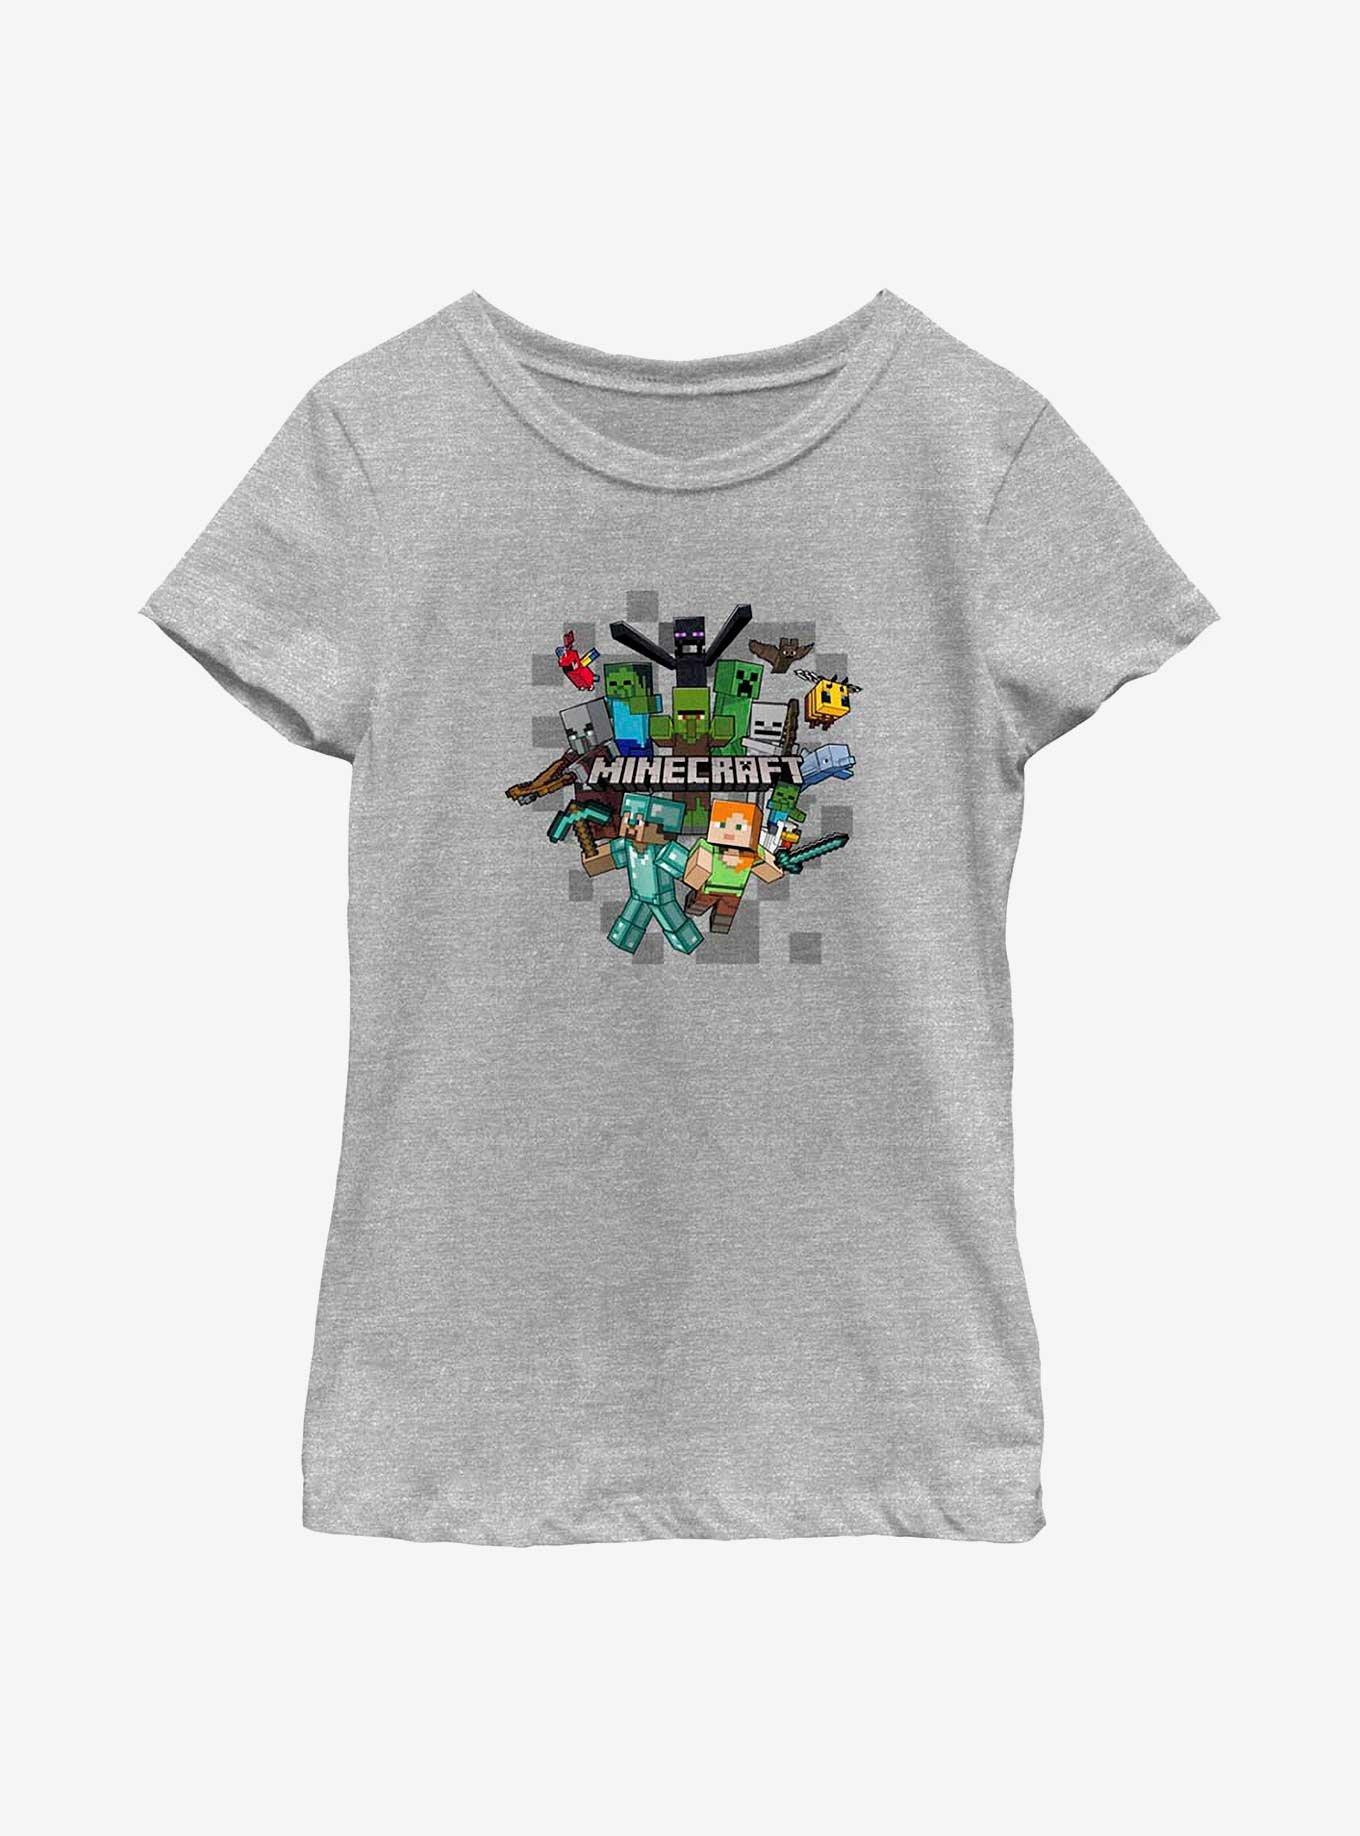 Minecraft Crafty Game On Youth Girls T-Shirt, ATH HTR, hi-res